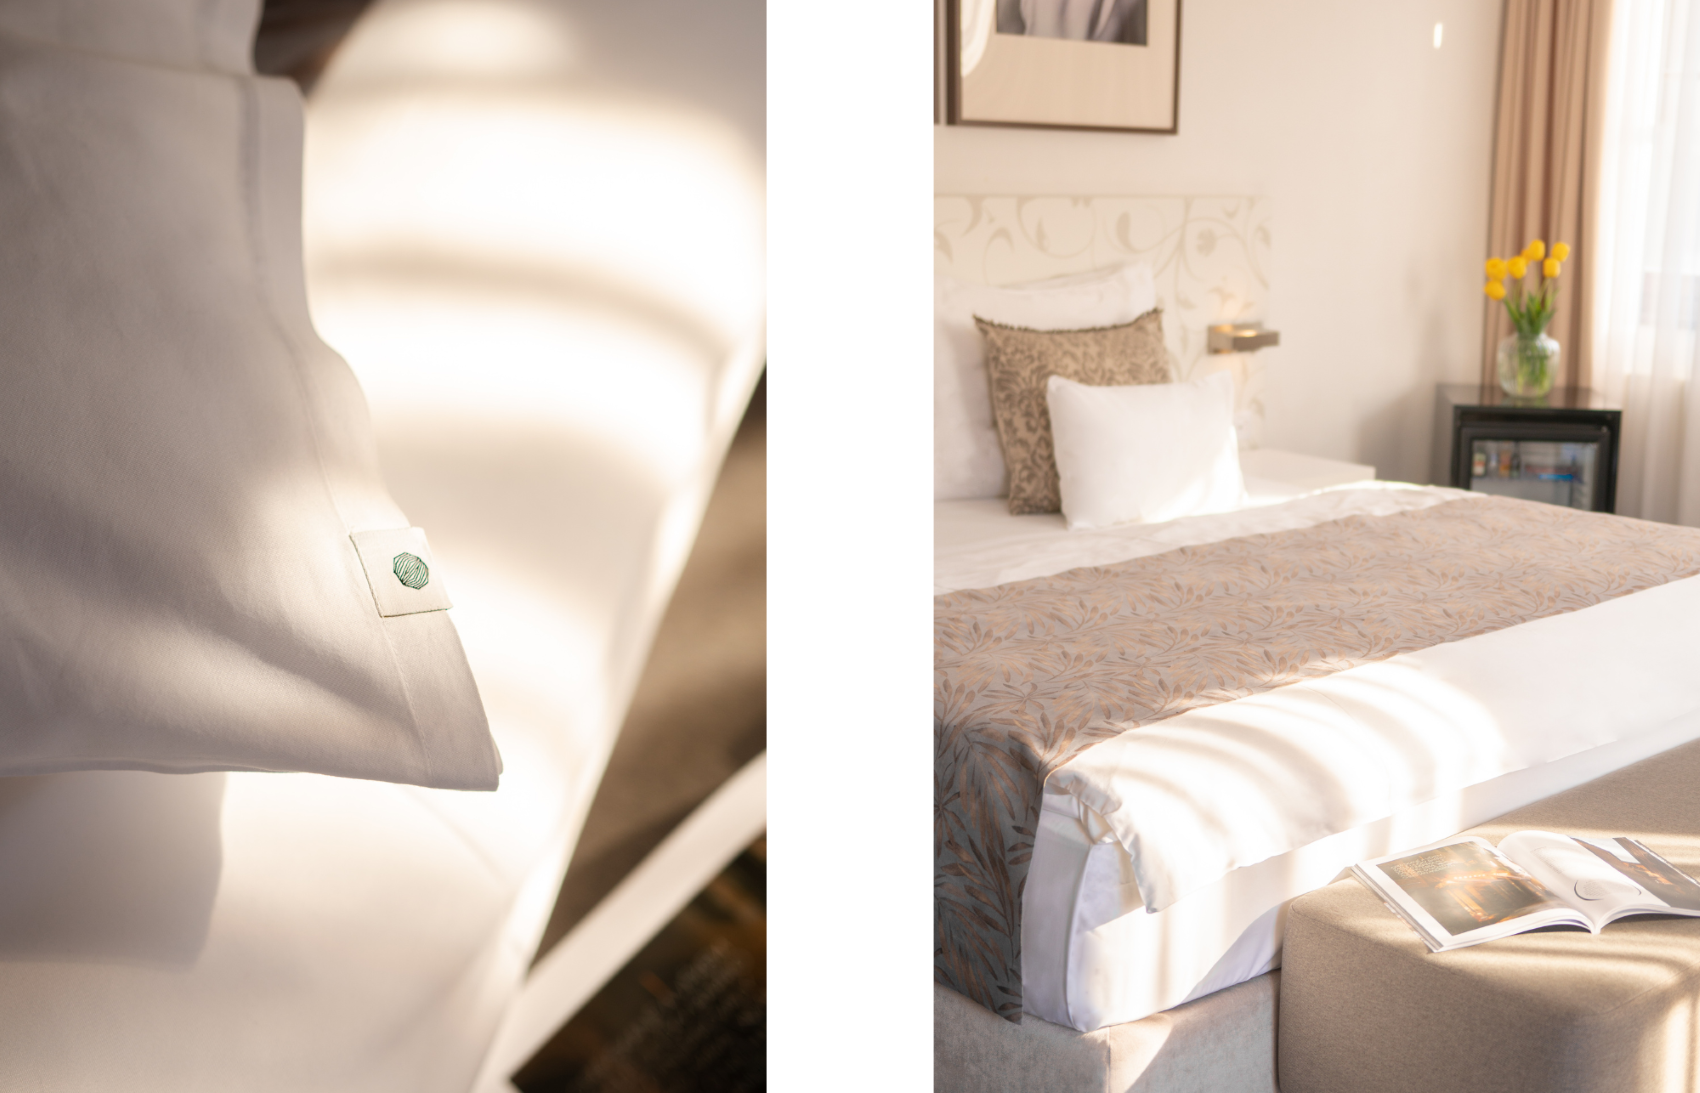 For a restful sleep, Savoy Hotel dressed its beds in our Frosty Morning bedsheets, and our Quiet Jungle bed linen.